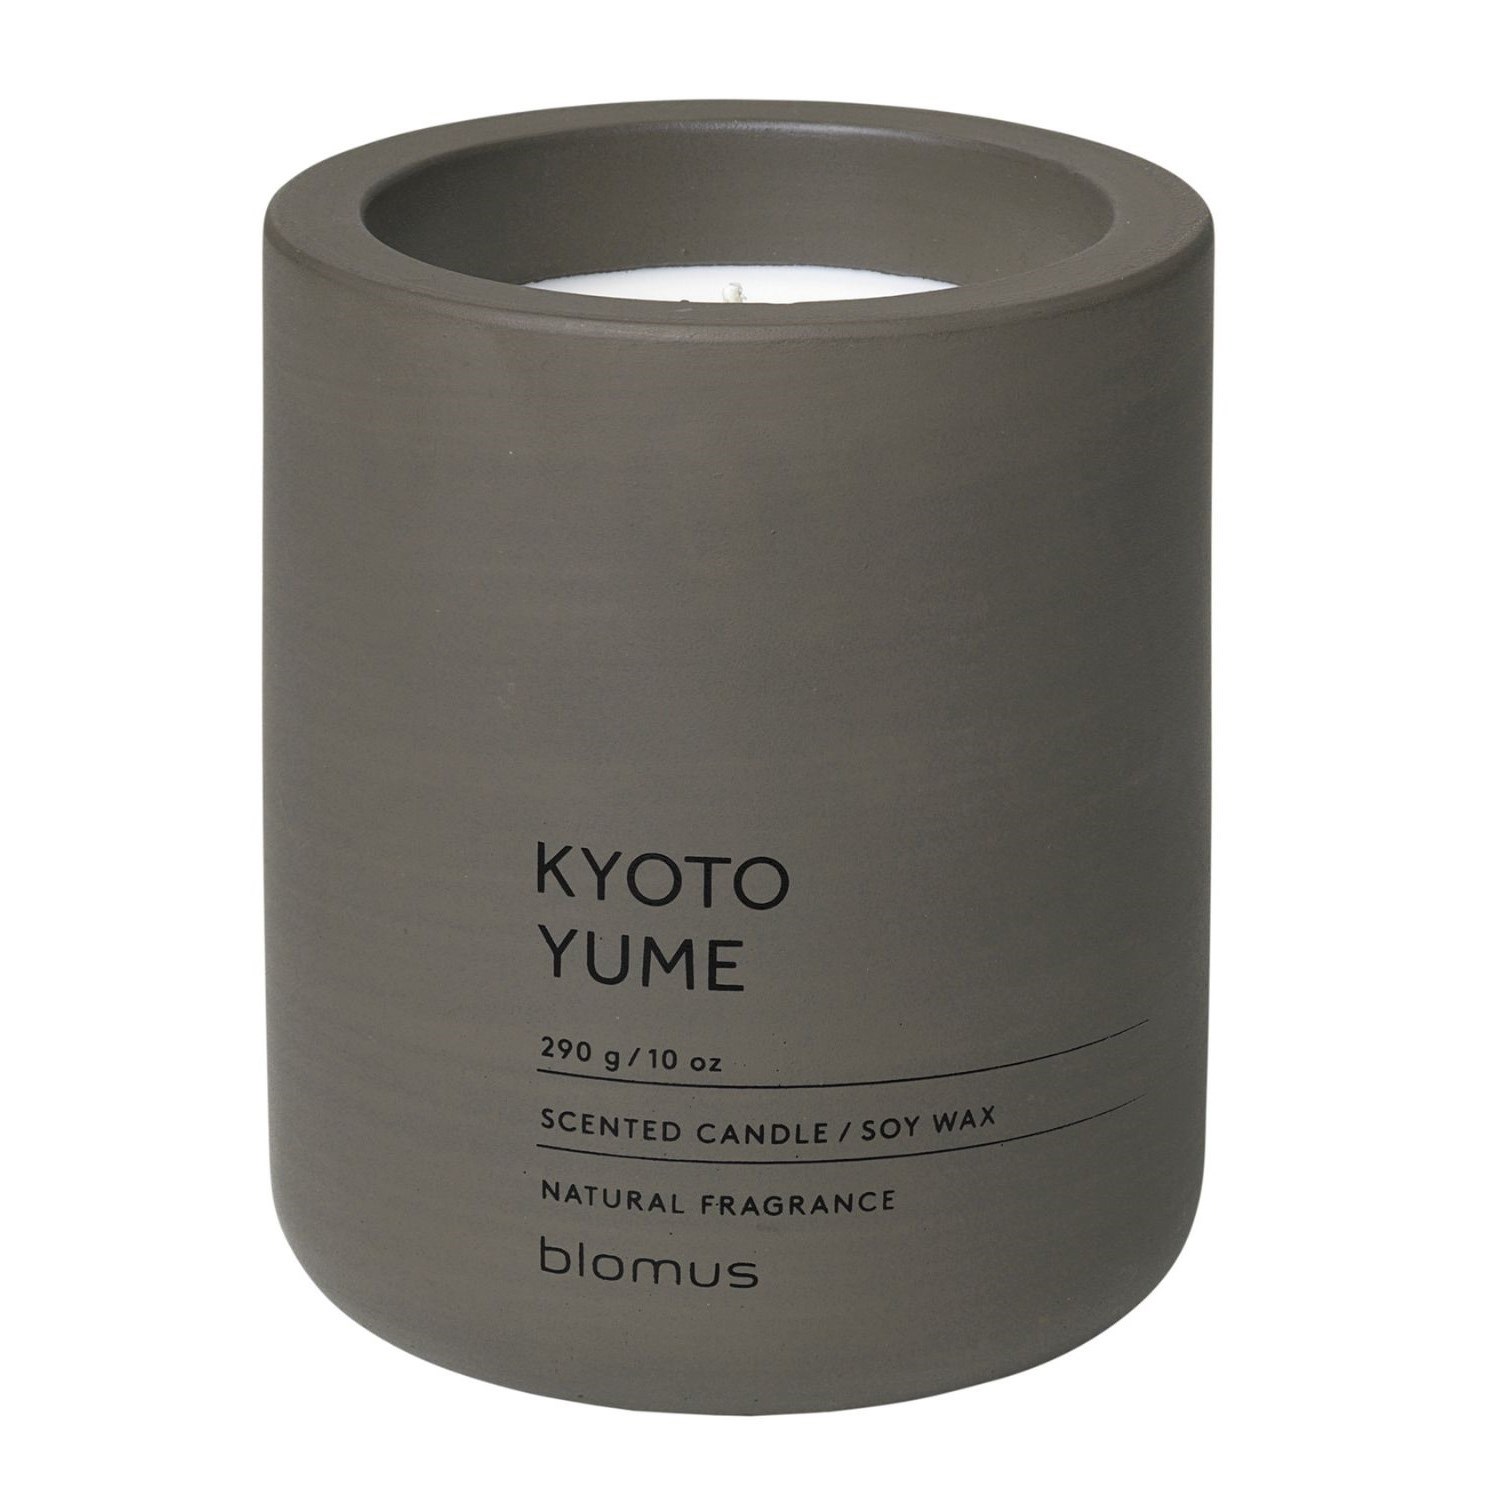 Läs mer om blomus Scented Candle Tarmac Kyoto Yume 290 g